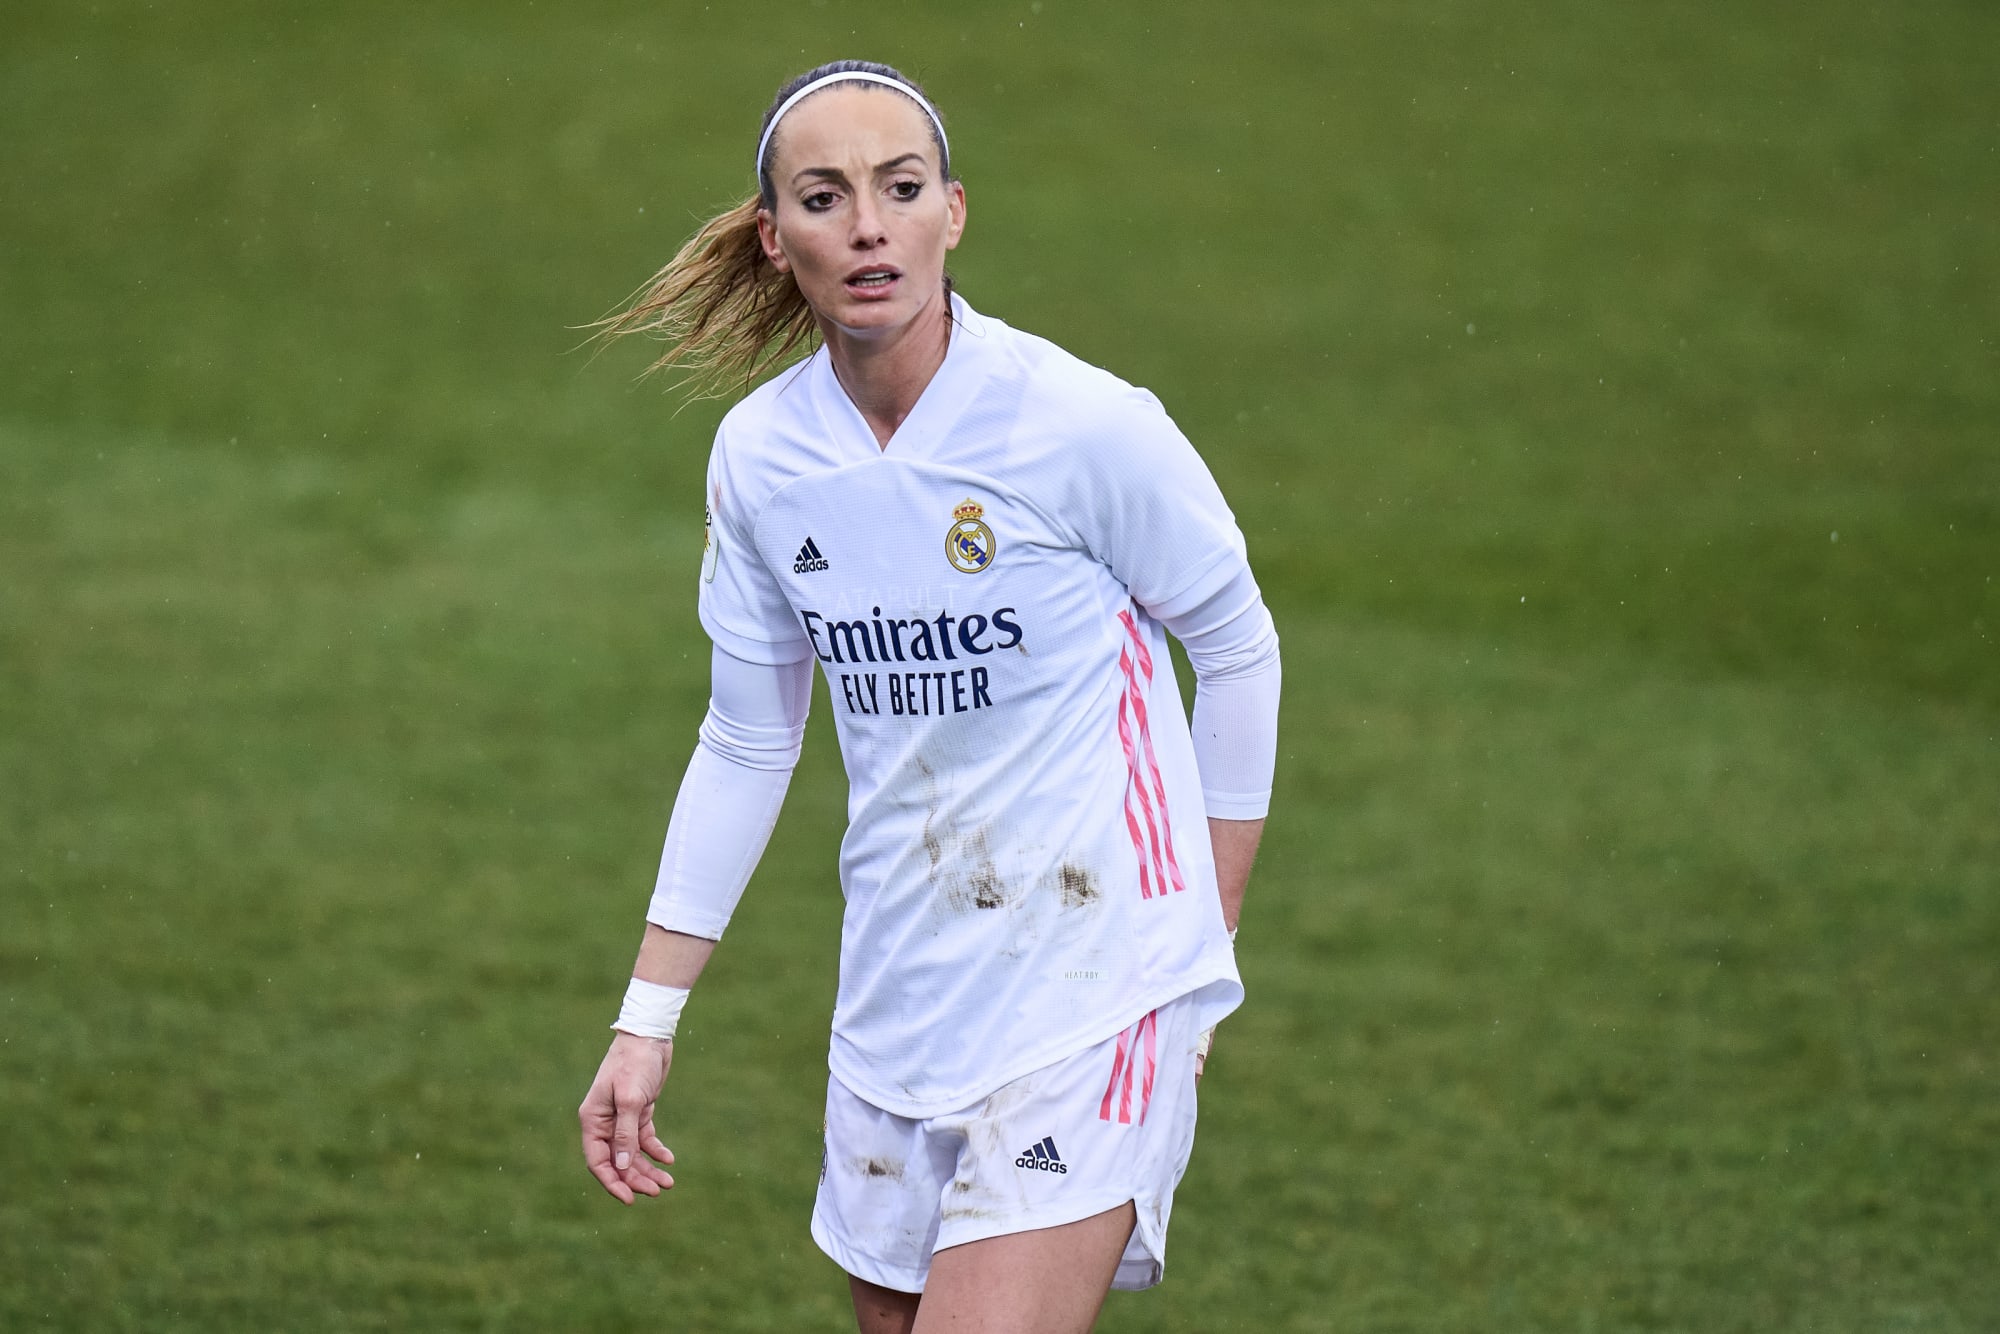 Real Madrid Femenino: 3 bold predictions for the rest of 2020-21